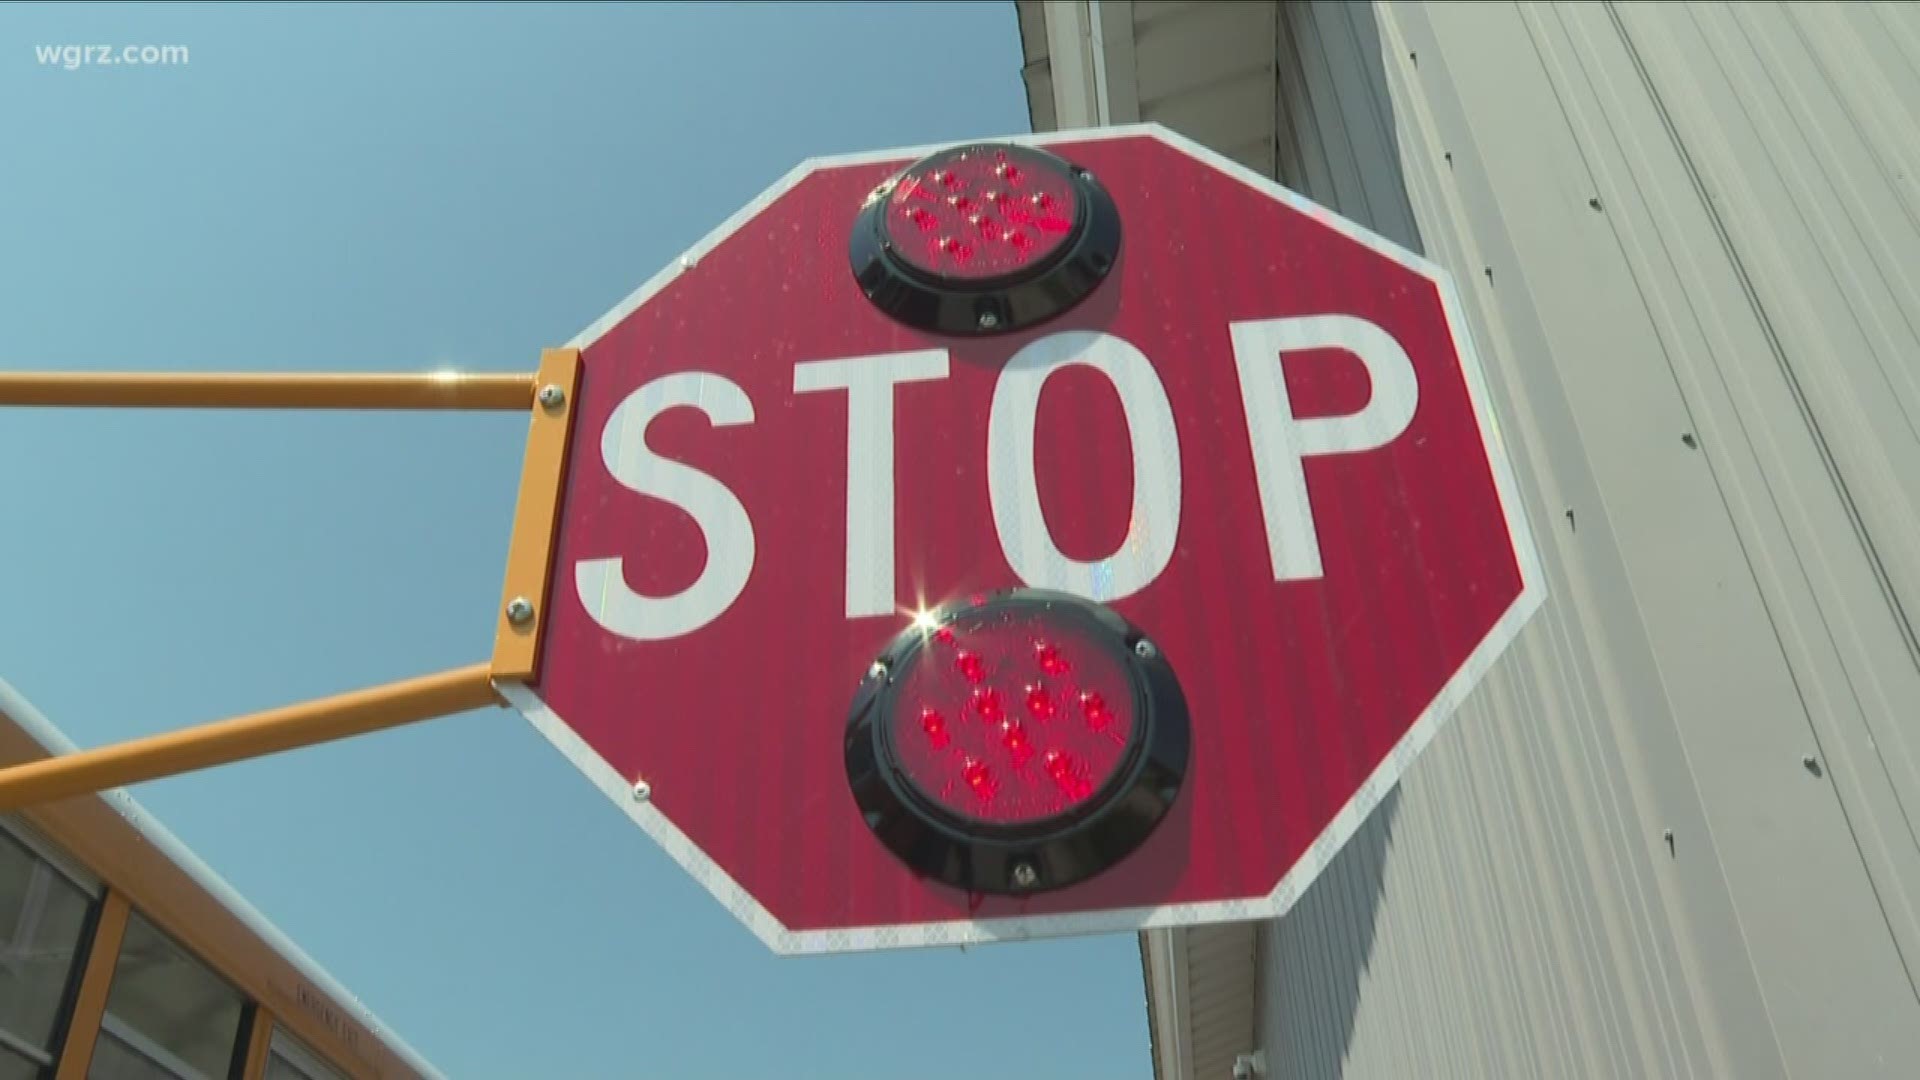 Through a pilot program, two buses are already equipped with cameras. In the first week, 20 vehicles were seen illegally passing stopped buses.